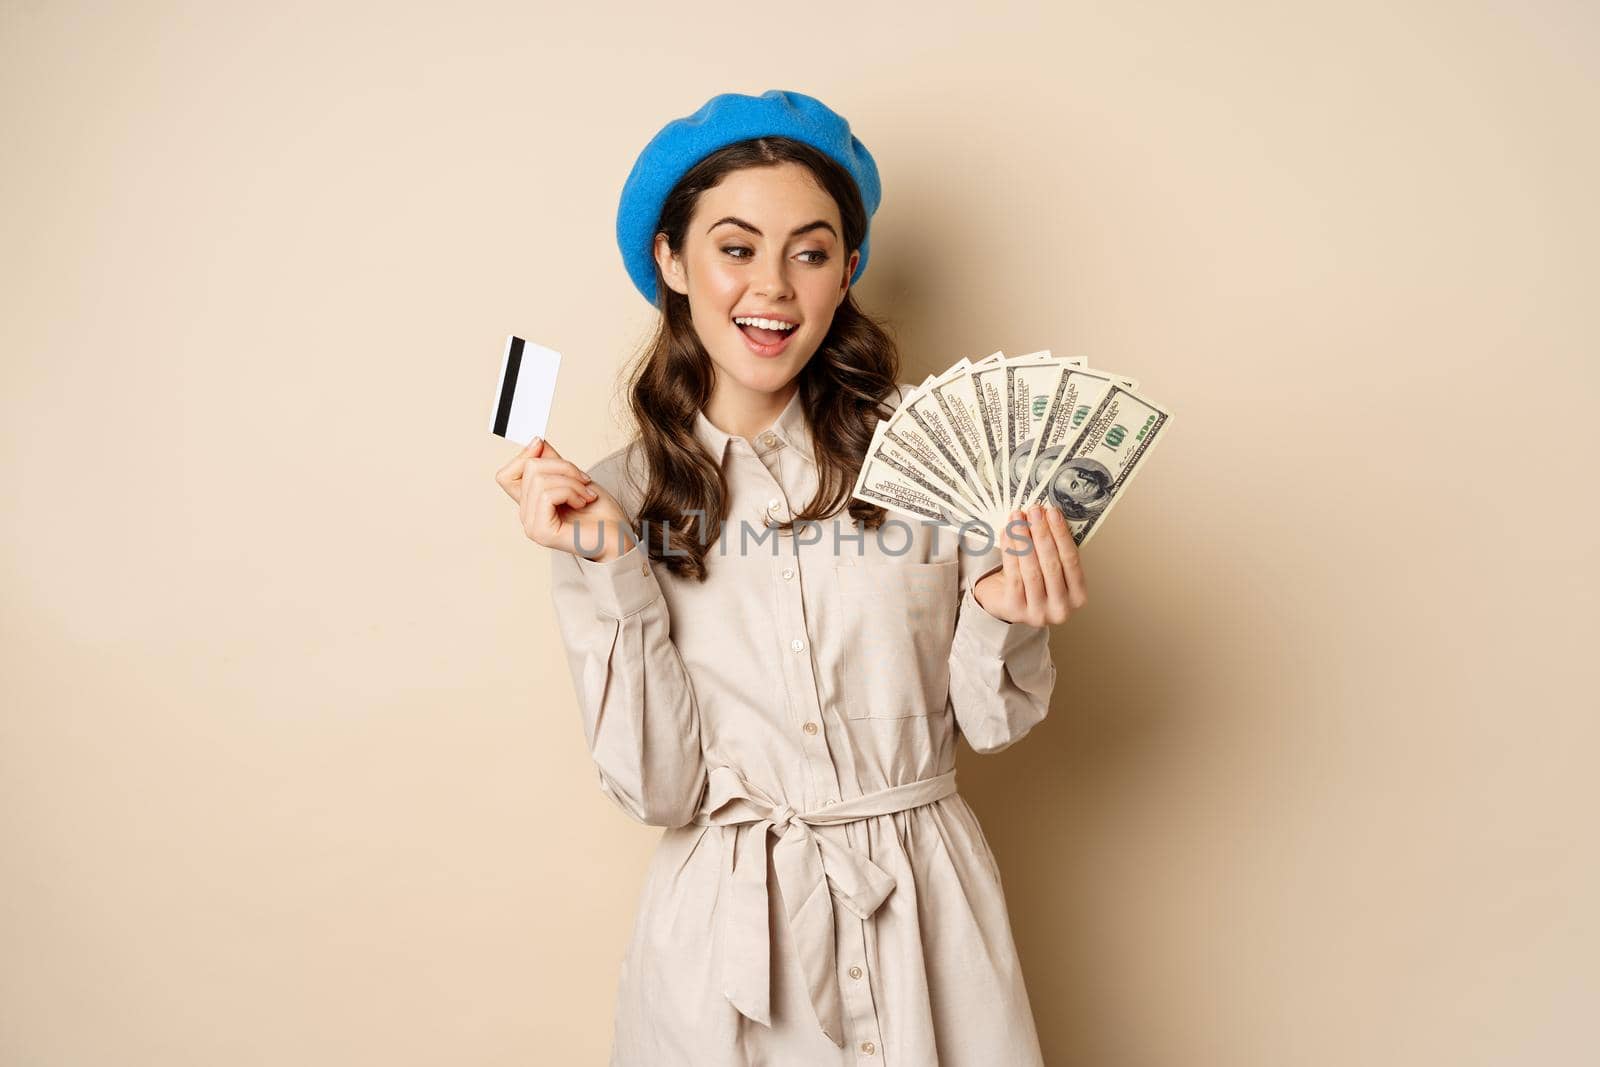 Microcredit and money concept. Young stylish woman showing credit card and dollars cash, smiling happy and satisfied, standing over beige background.